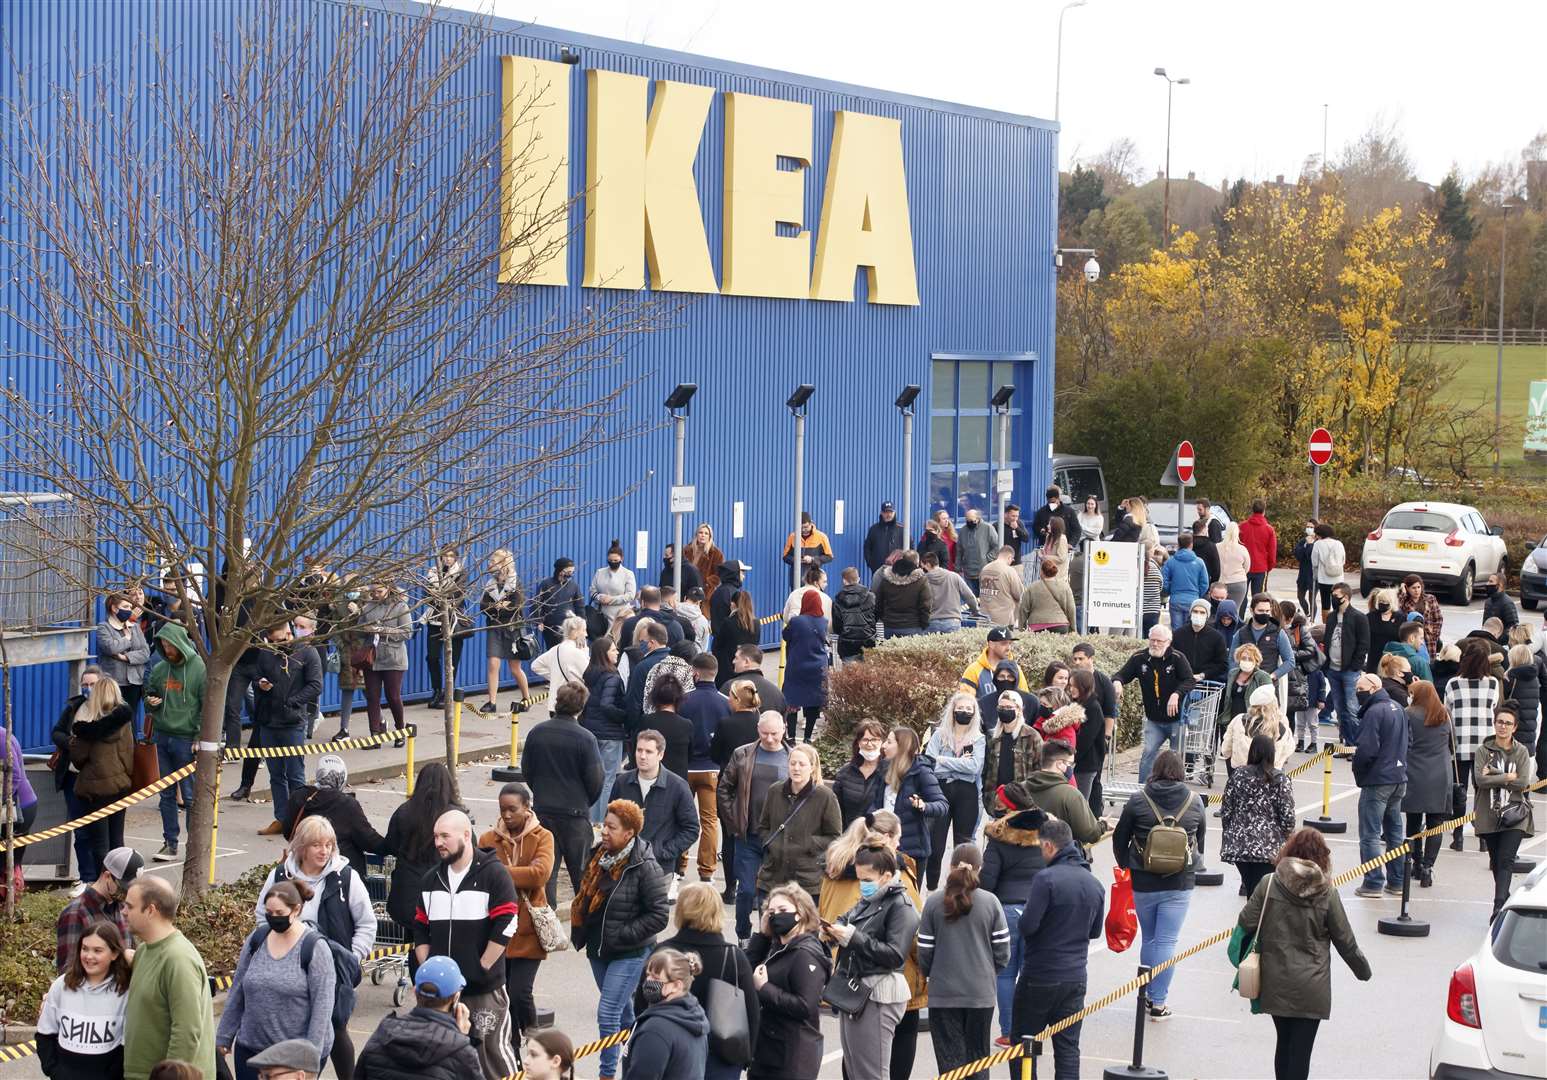 Shoppers queue outside Ikea in Batley, West Yorkshire before the November lockdown in England (Danny Lawson/PA)